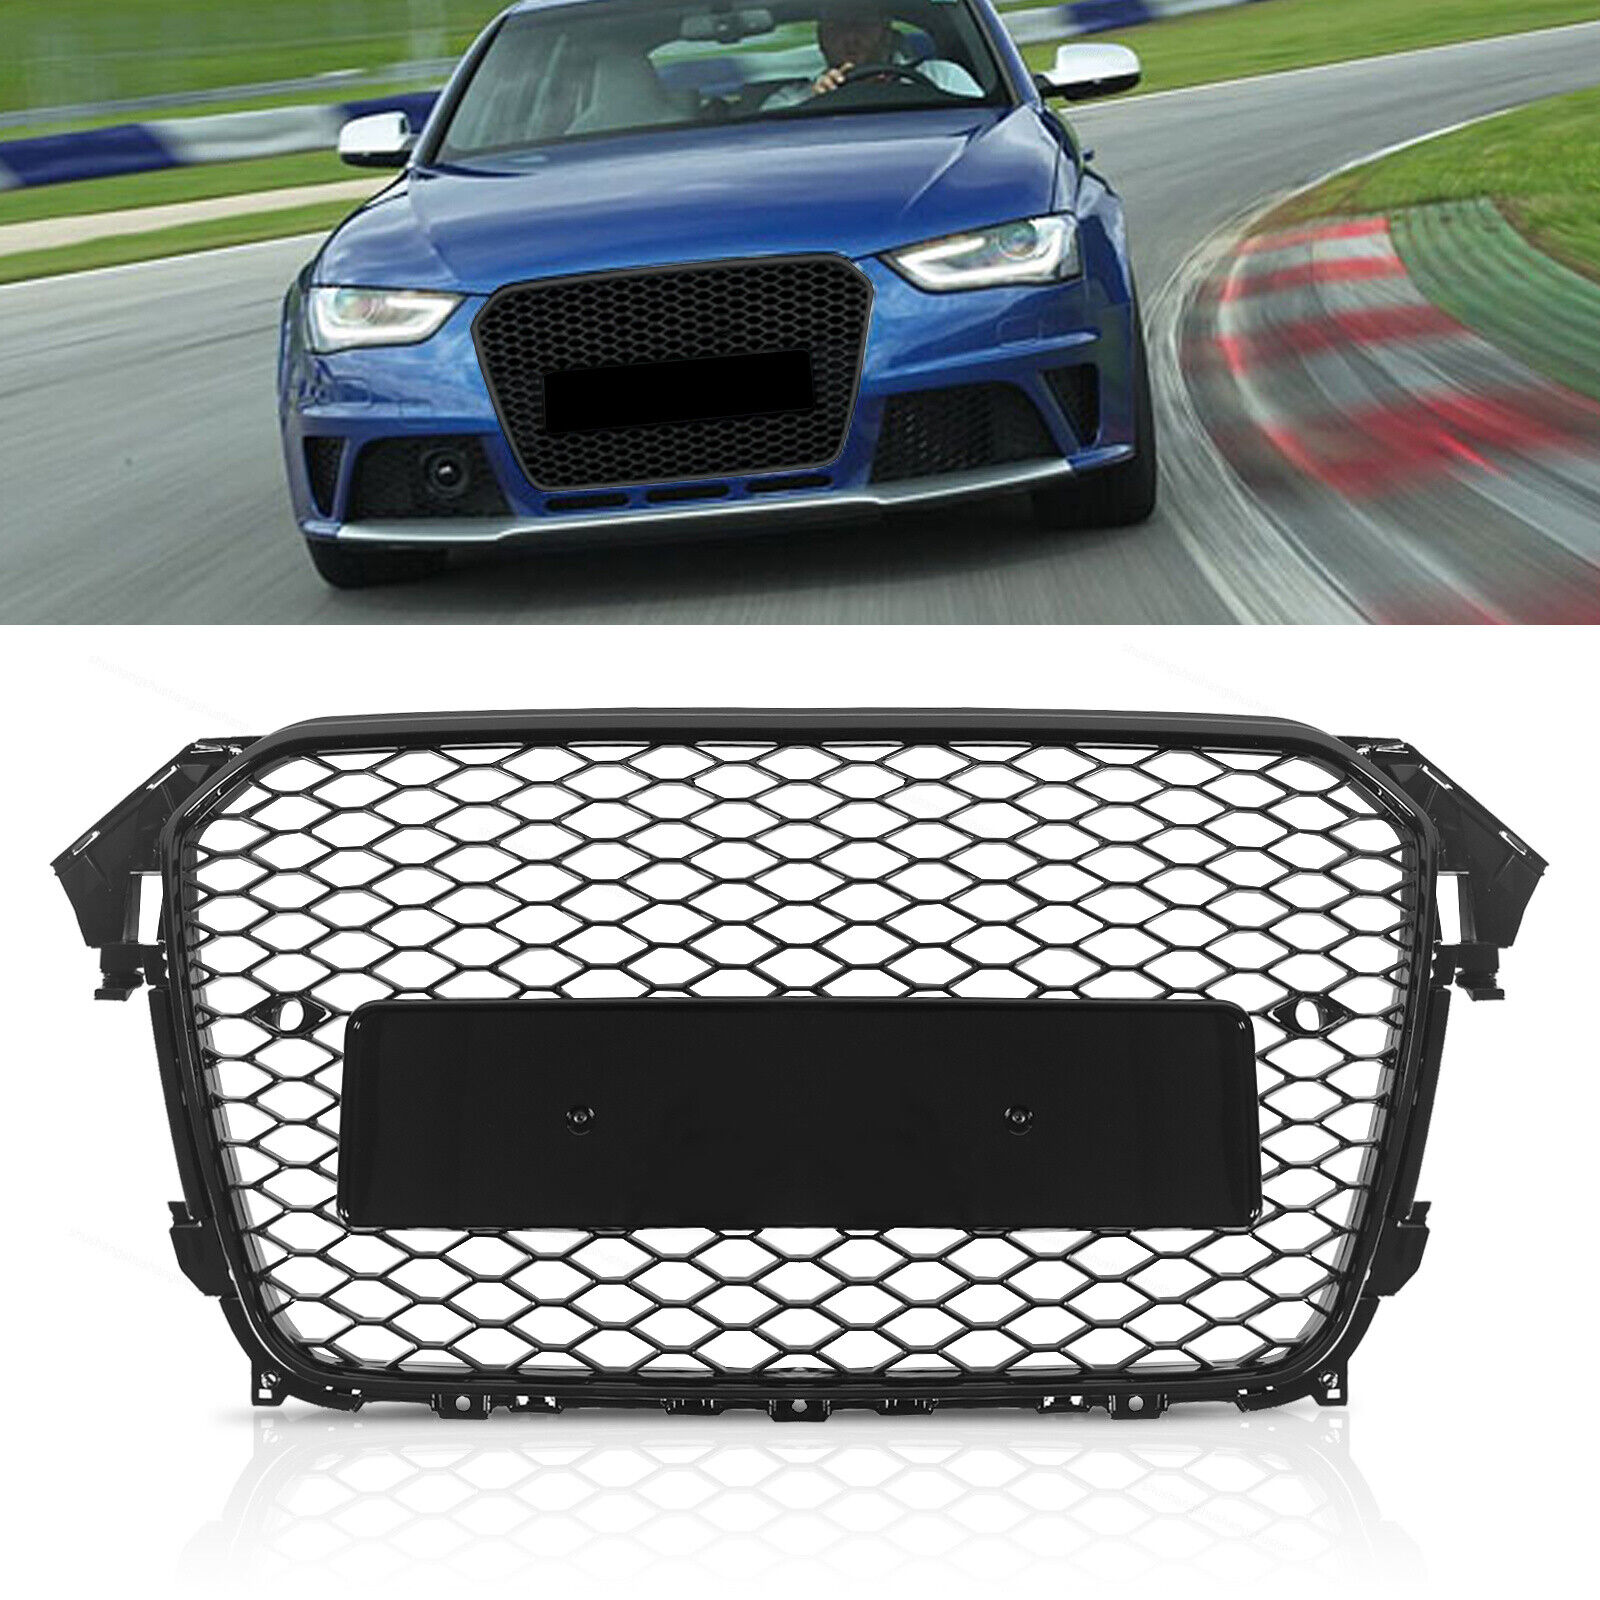 Black Front Grille RS4 Honeycomb Grill Fit For Audi B8.5 A4 S4 2013 13 14 15 16